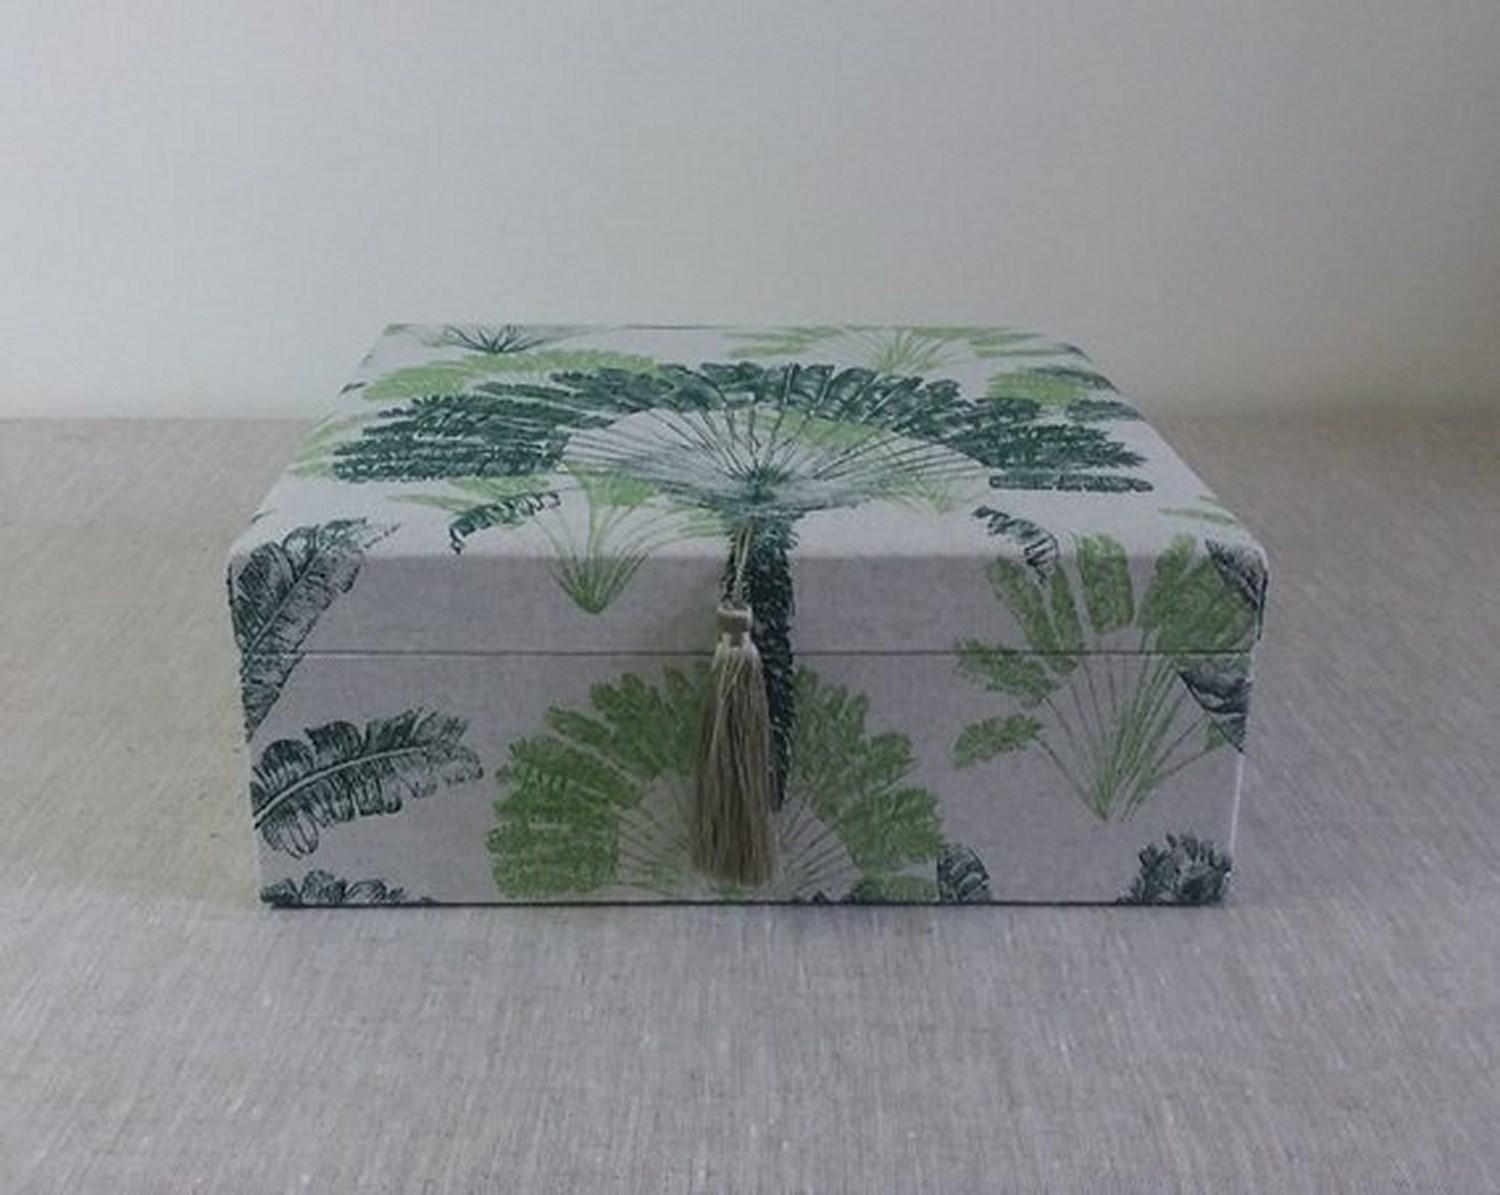 Beautiful storage box entirely handmade

Perfect for storing your Hermès scarves !

Made of Wood Cardboard and covered with a cotton and linen fabric

The lid of the box is slightly padded and decorated with a pompom

Pattern: Leaves, Tropical